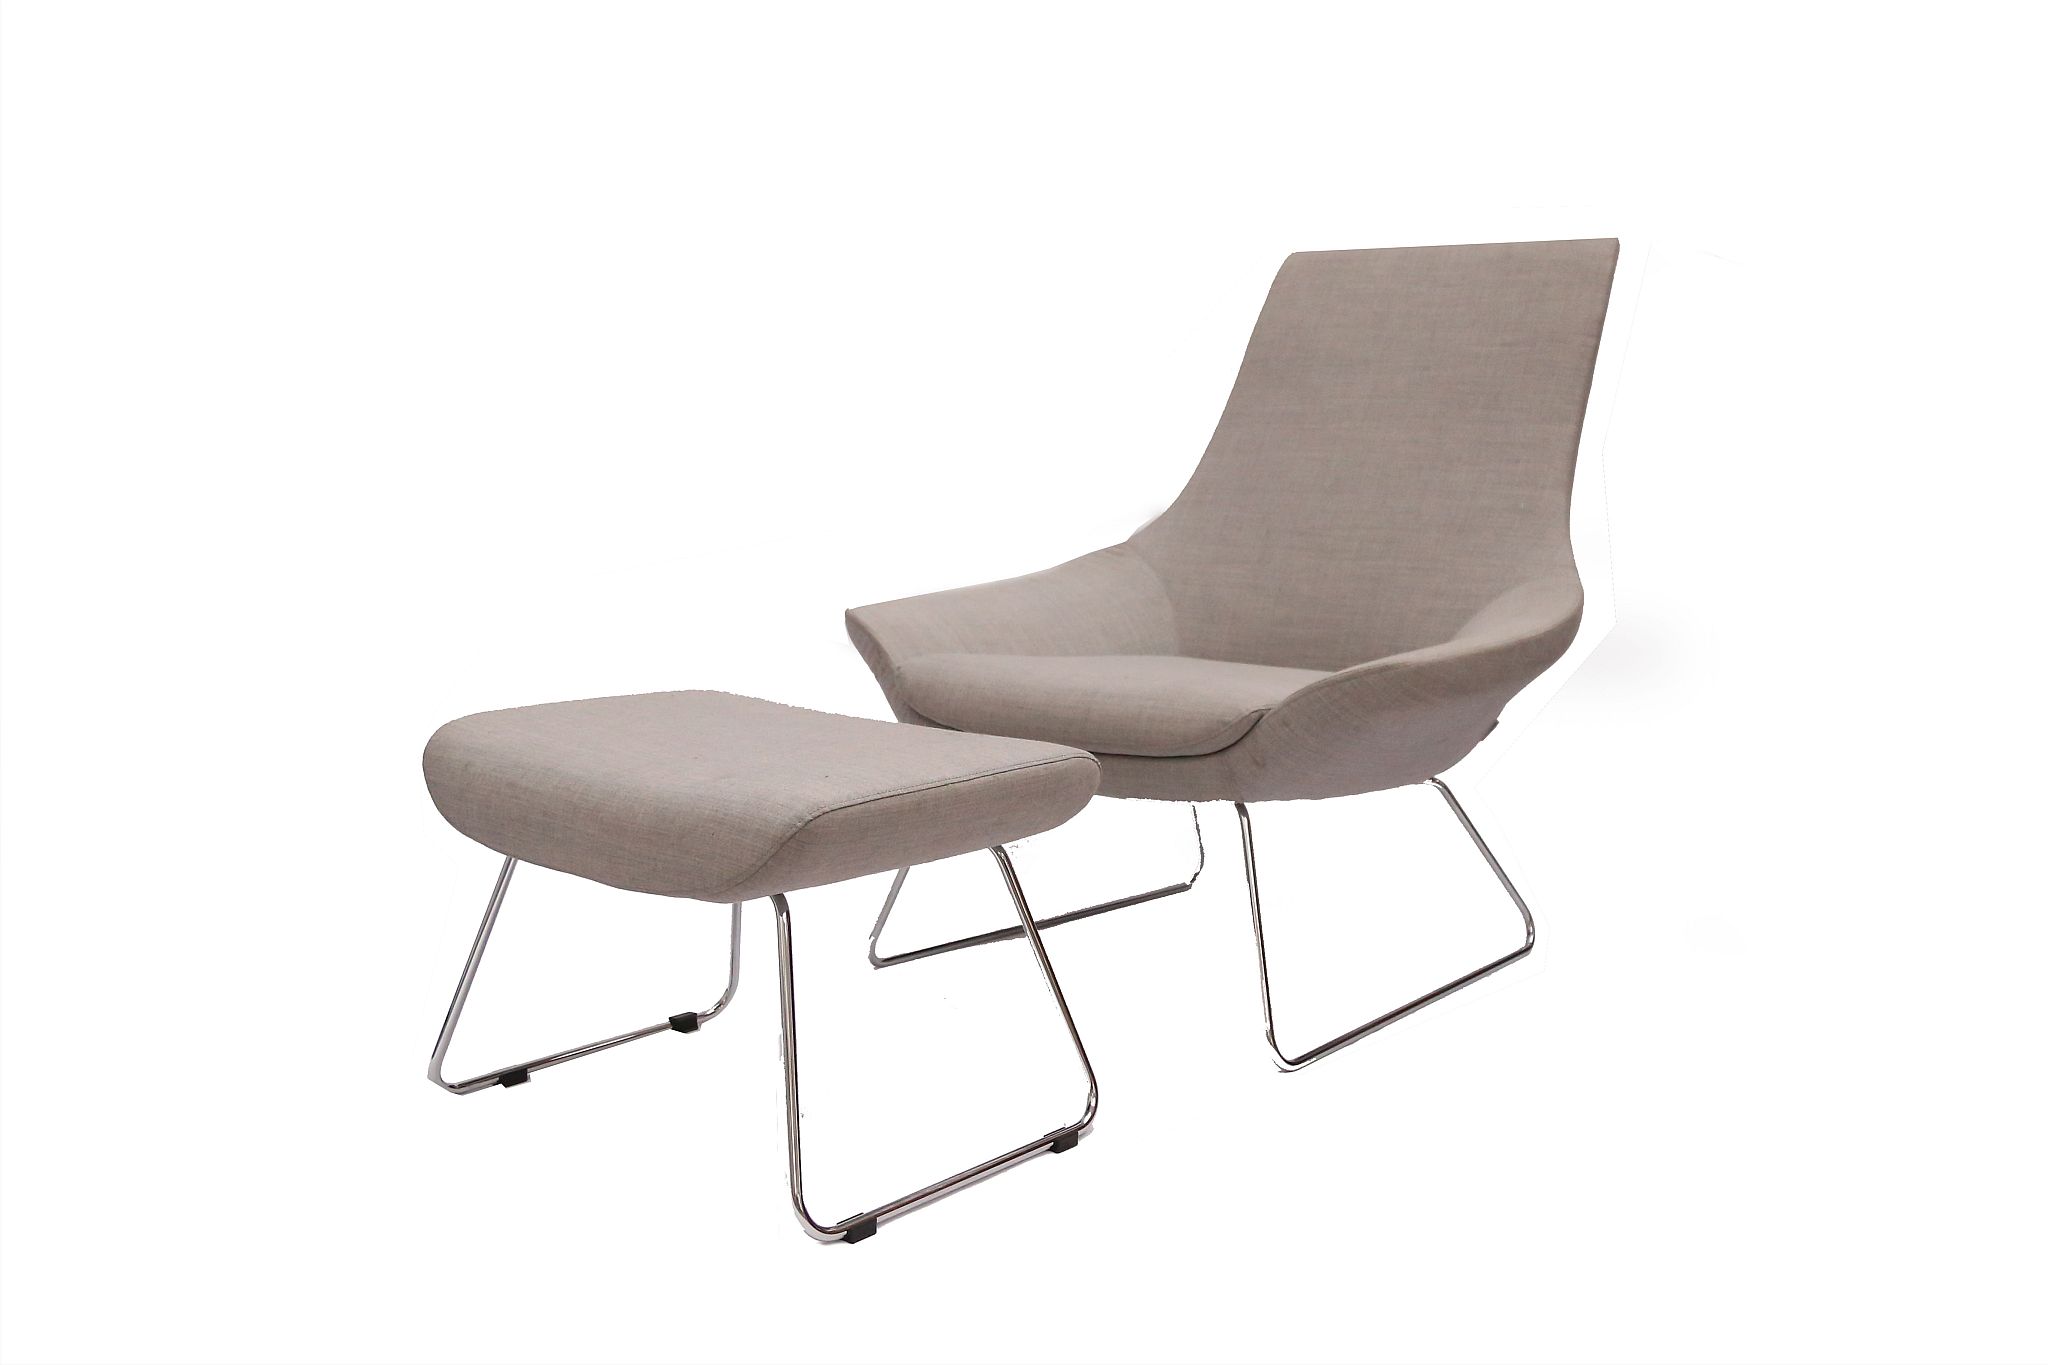 A FLOW LOUNGE CHAIR AND FOOT STOOL, DESIGNED BY TOM LLOYD, MANUFACTURED BY WALTER KNOLL, in light